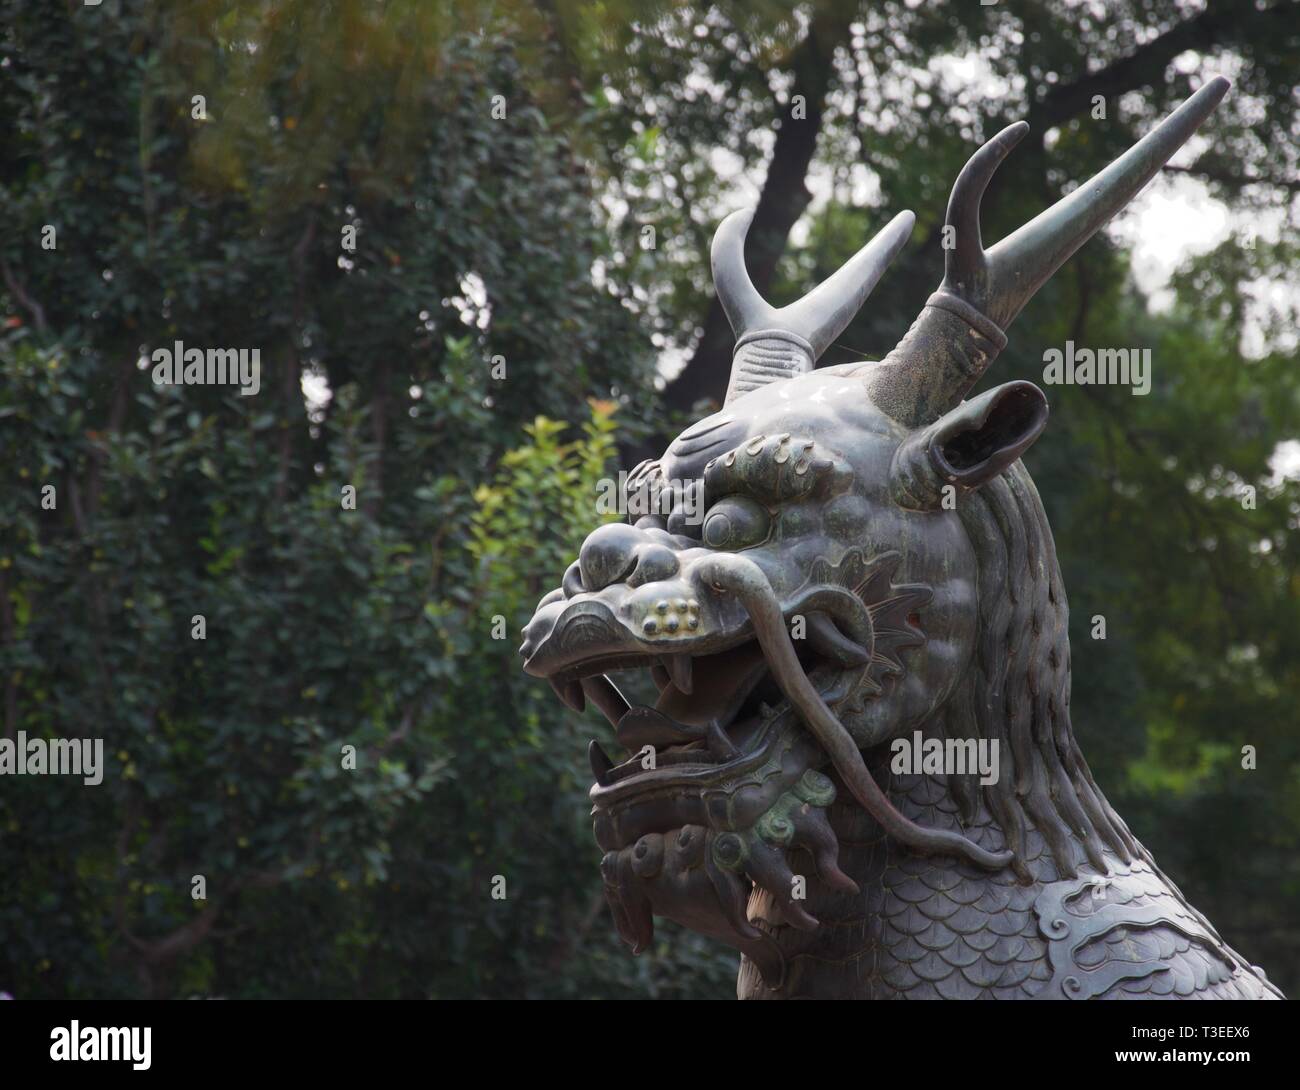 Close up of the head of a chinese dragon statue. Antlers and moustache and a laughing open mouth. Trees in background Stock Photo